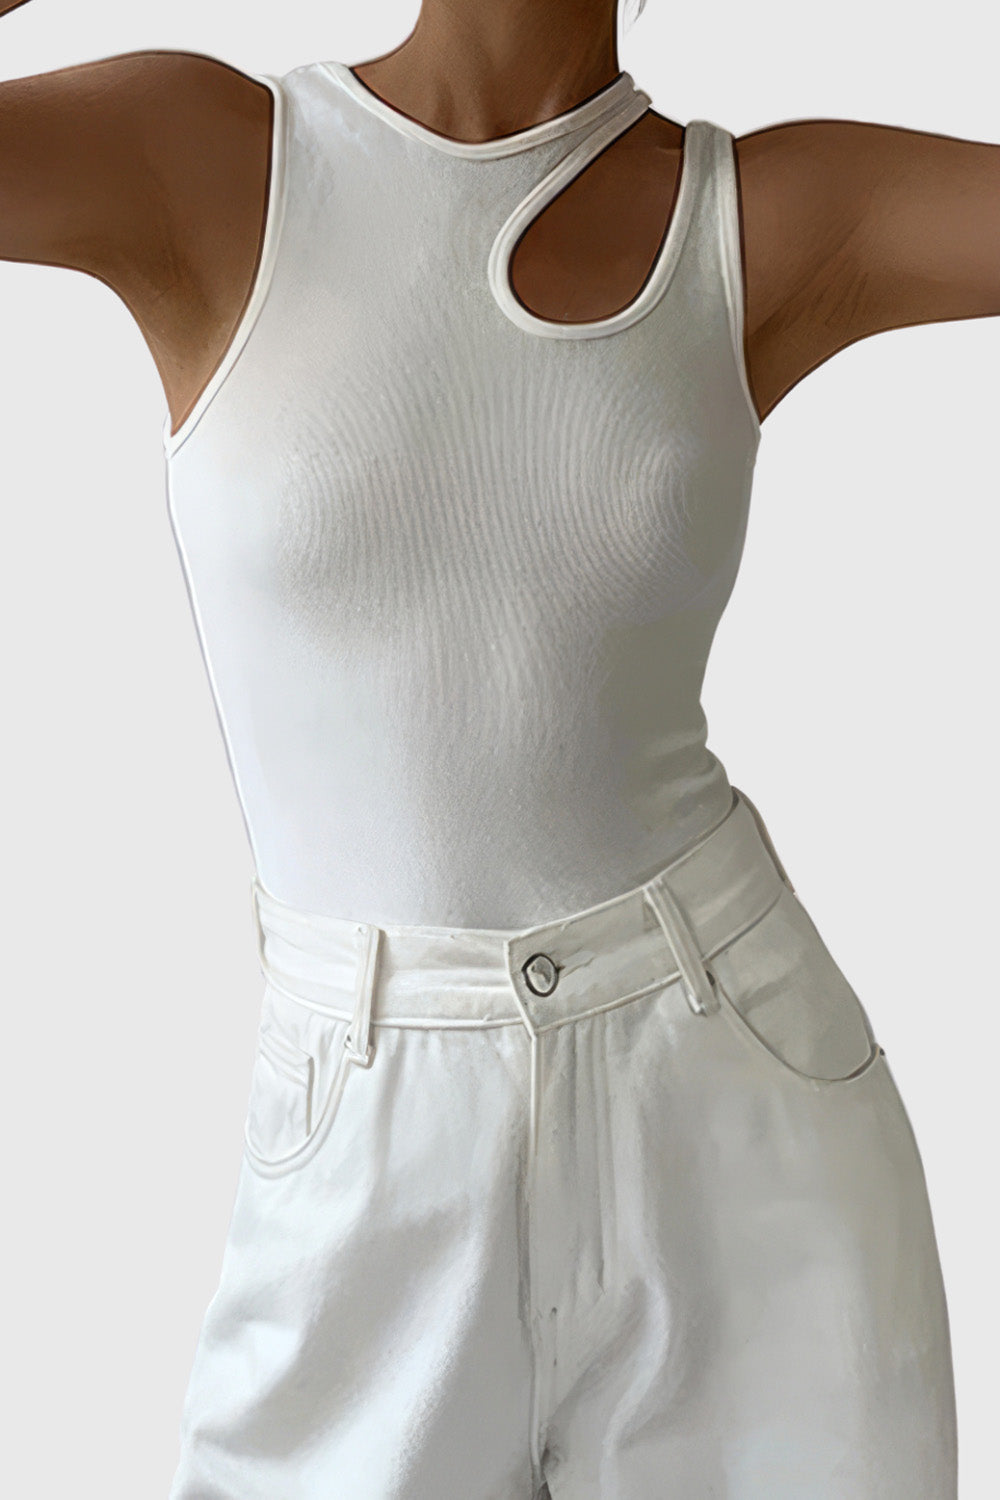 Sleeveless Top with Shoulder Cut - White